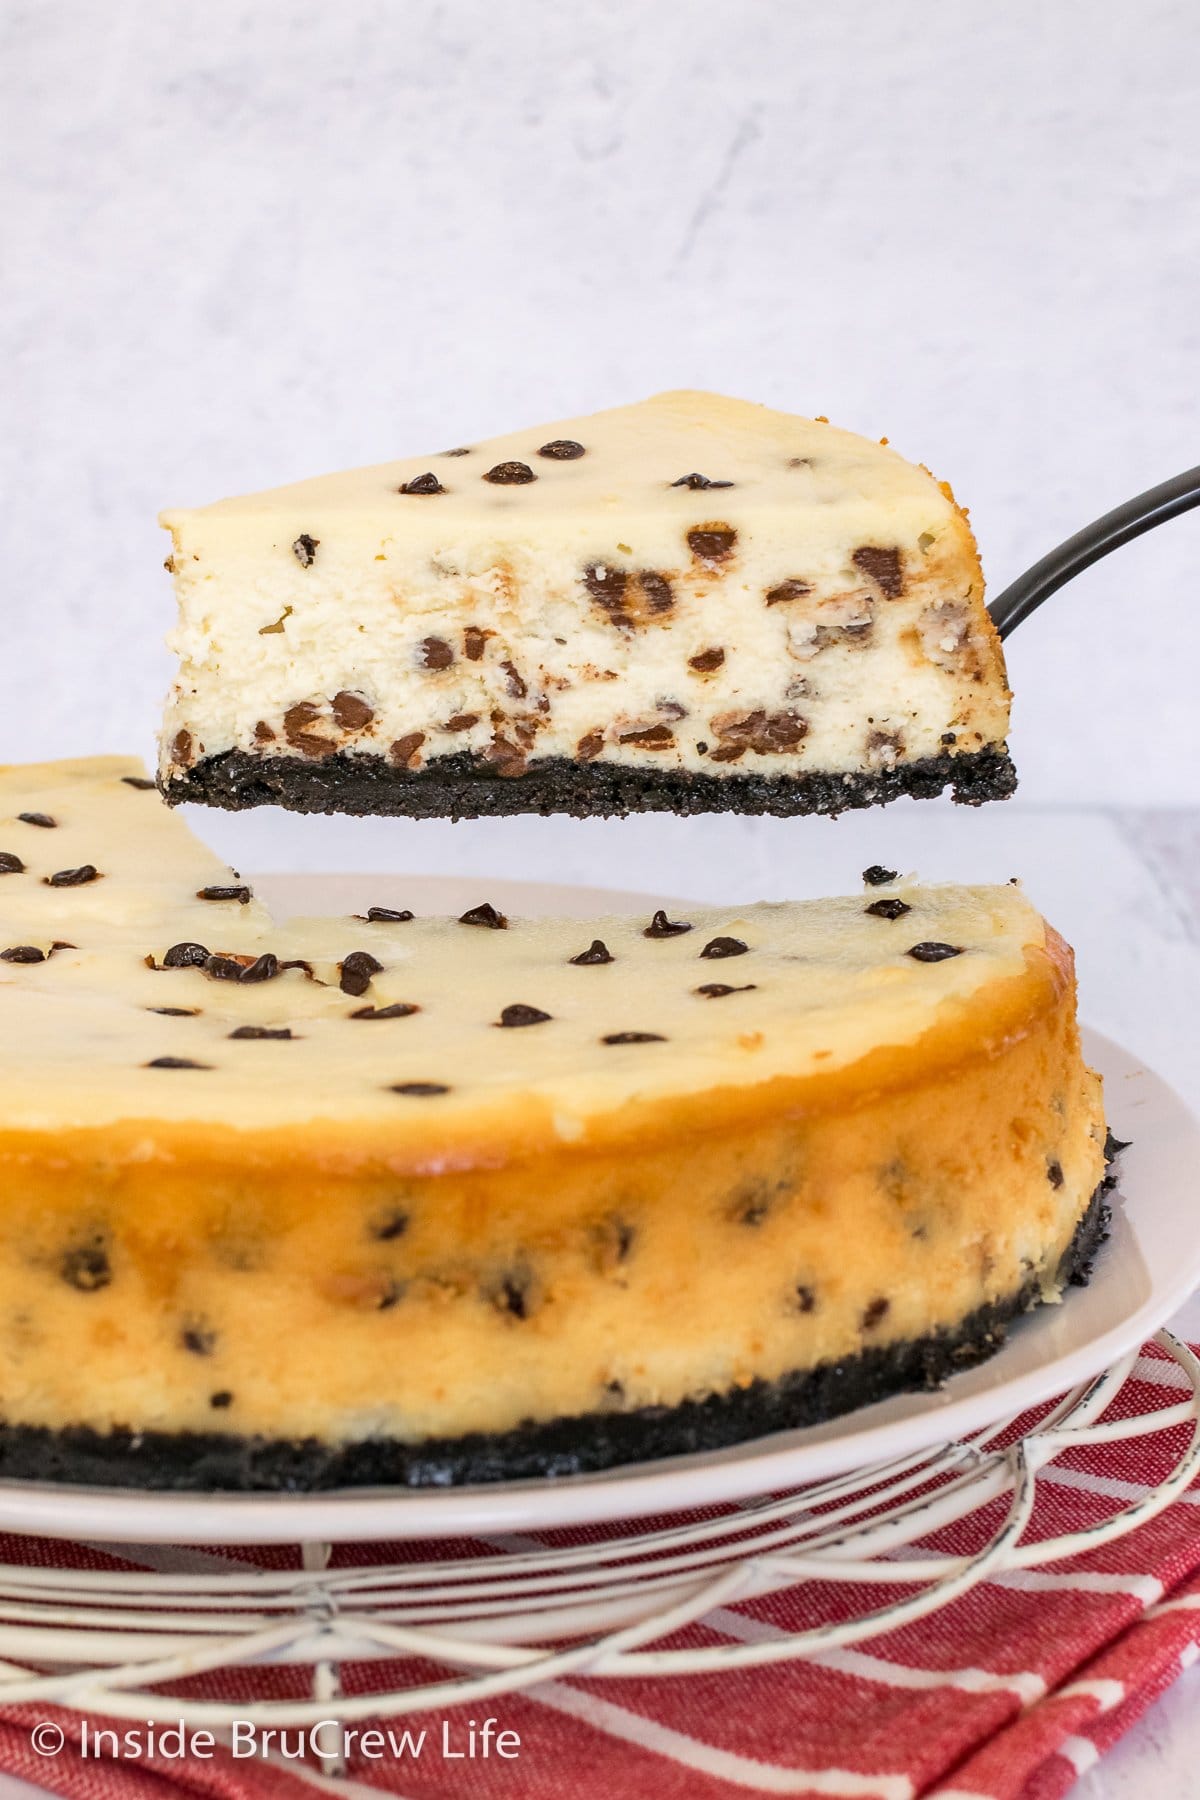 A full sized chocolate chip cheesecake with a slice lifted up.